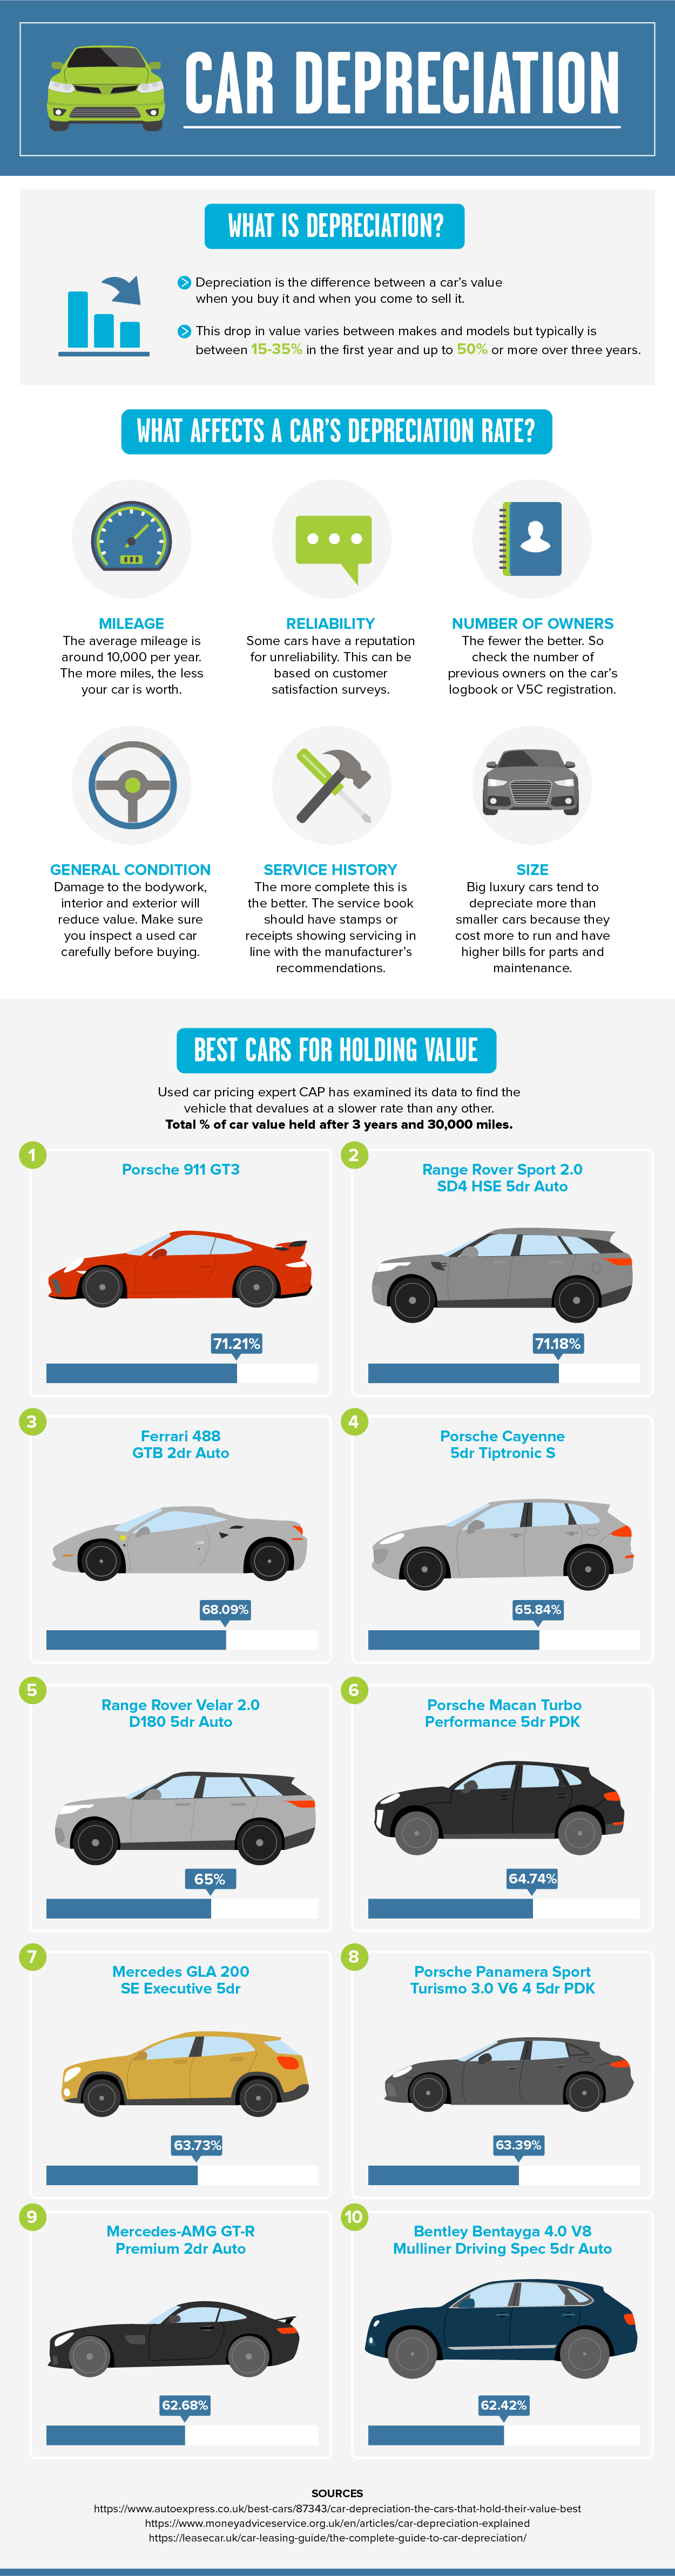 Car Depreciation Rates: What Cars Hold Their Value Best?